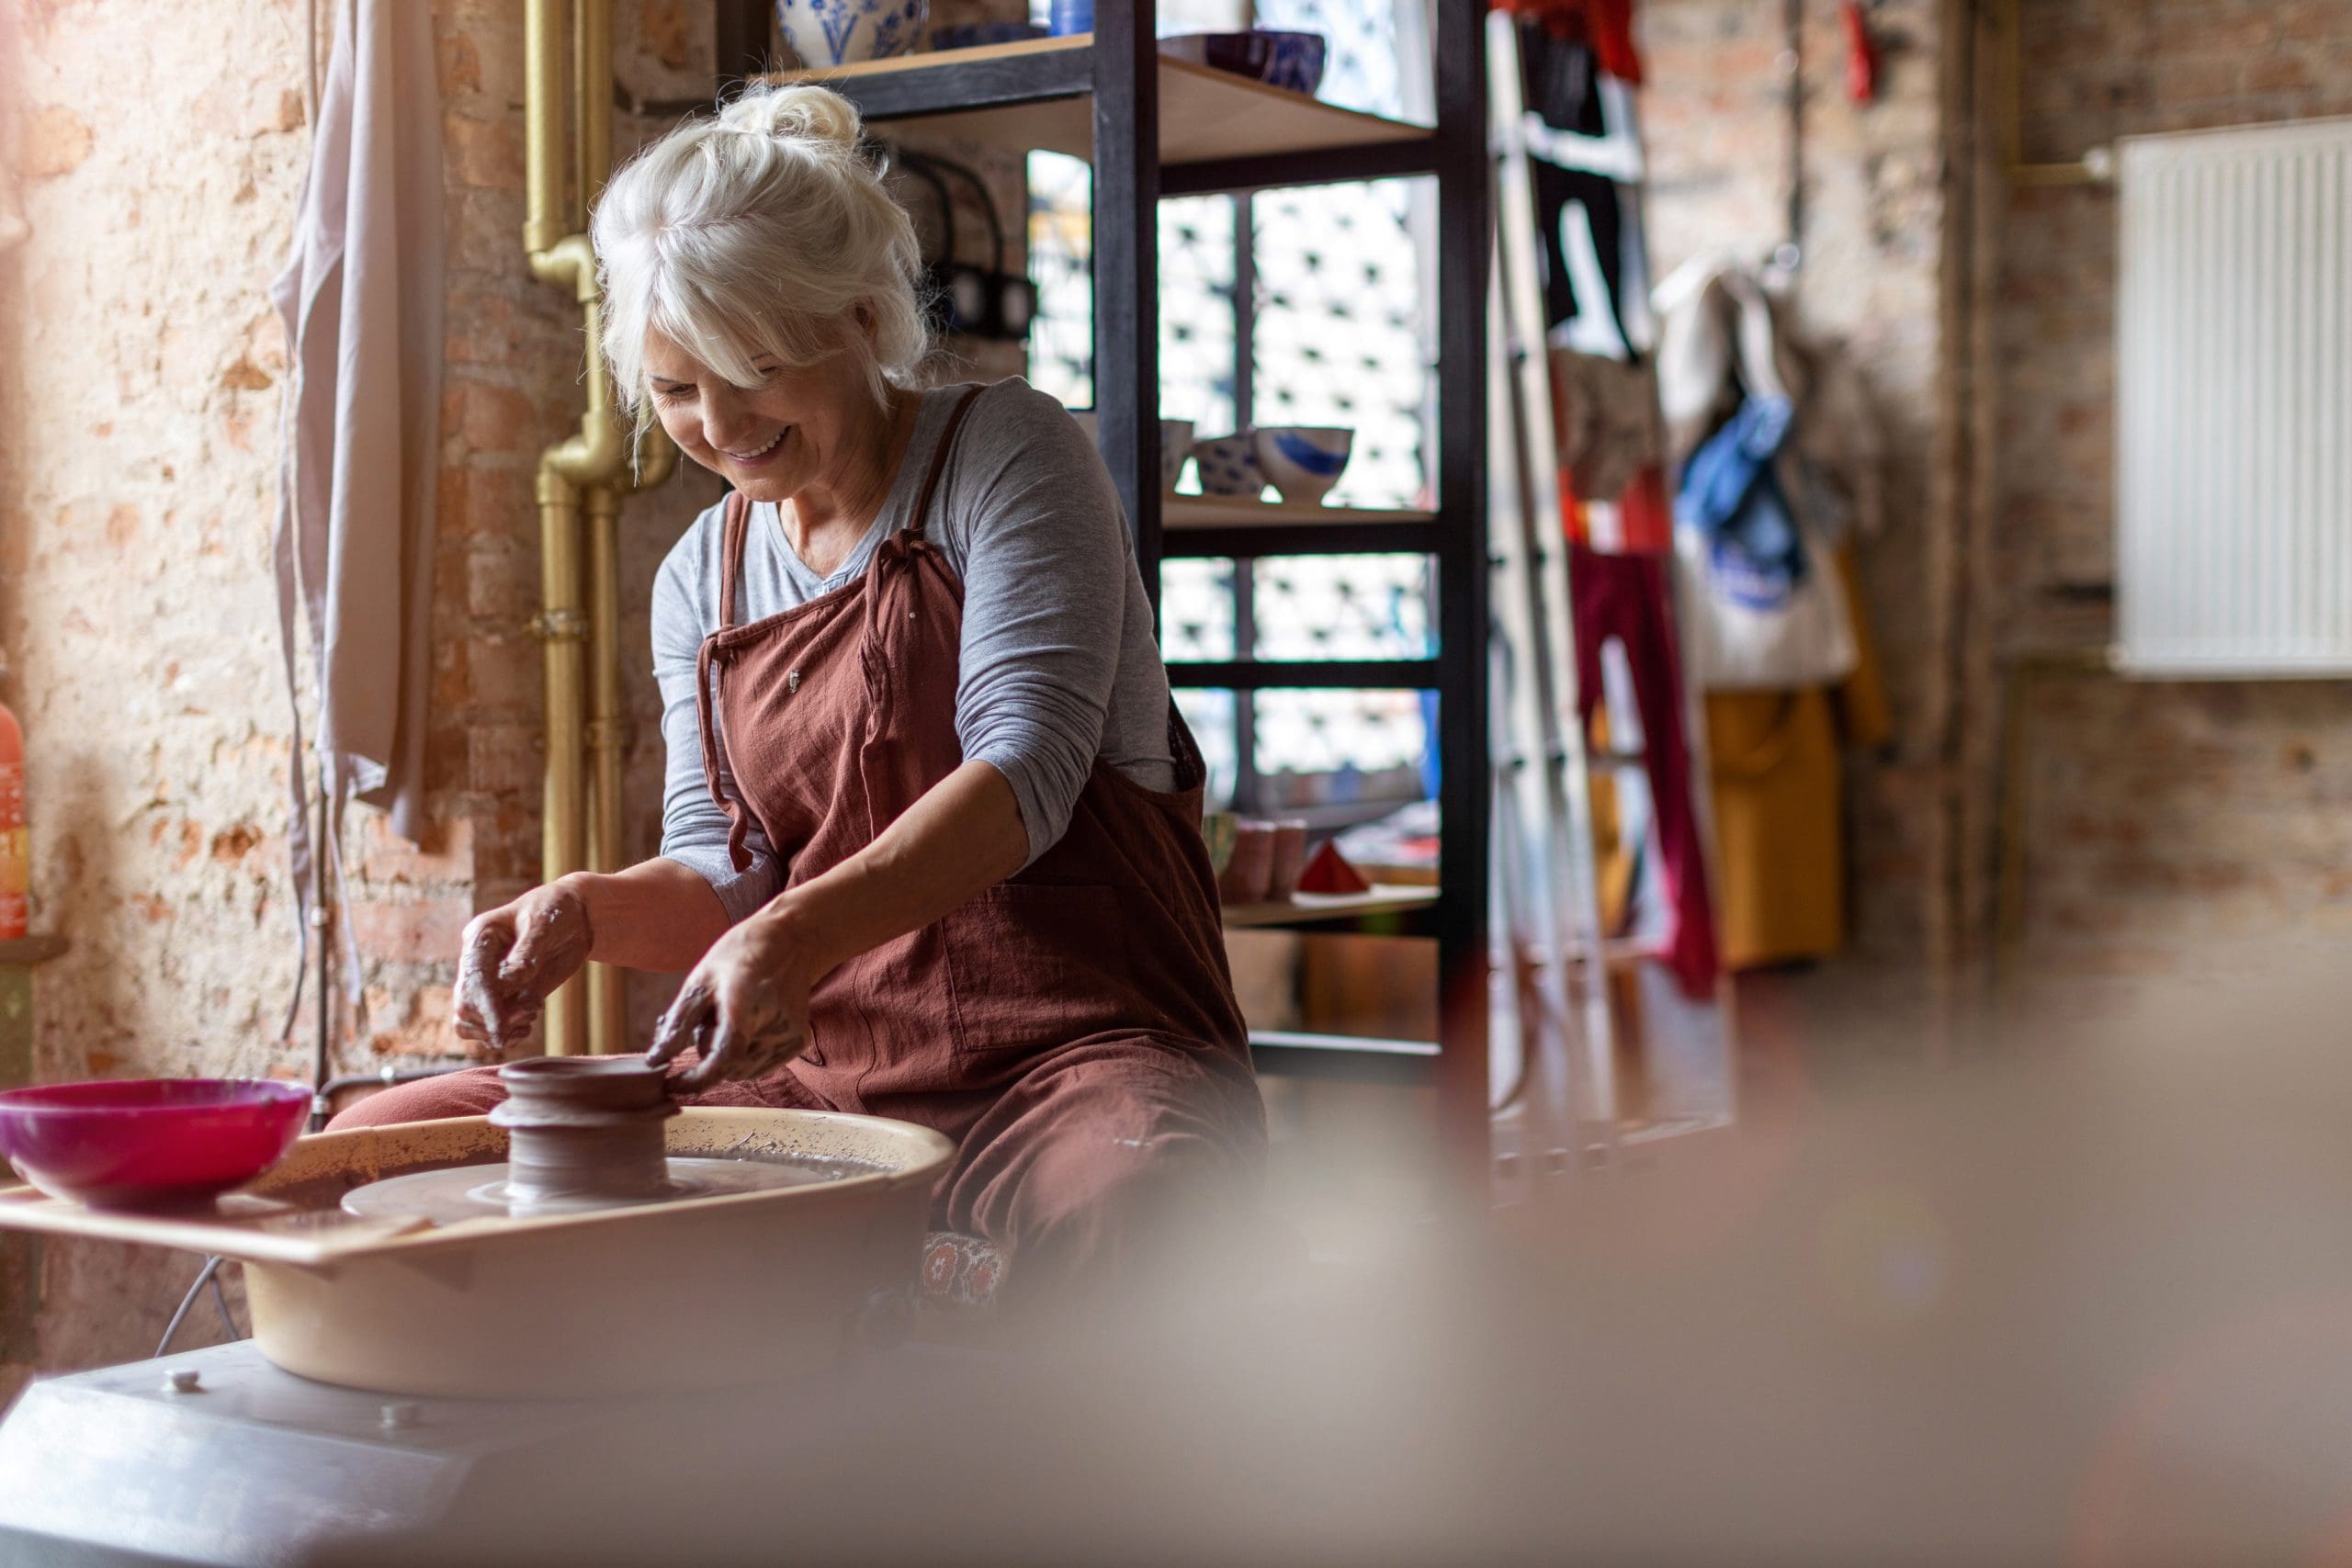 Hand made ceramics are formed by a mature woman on a potters wheel